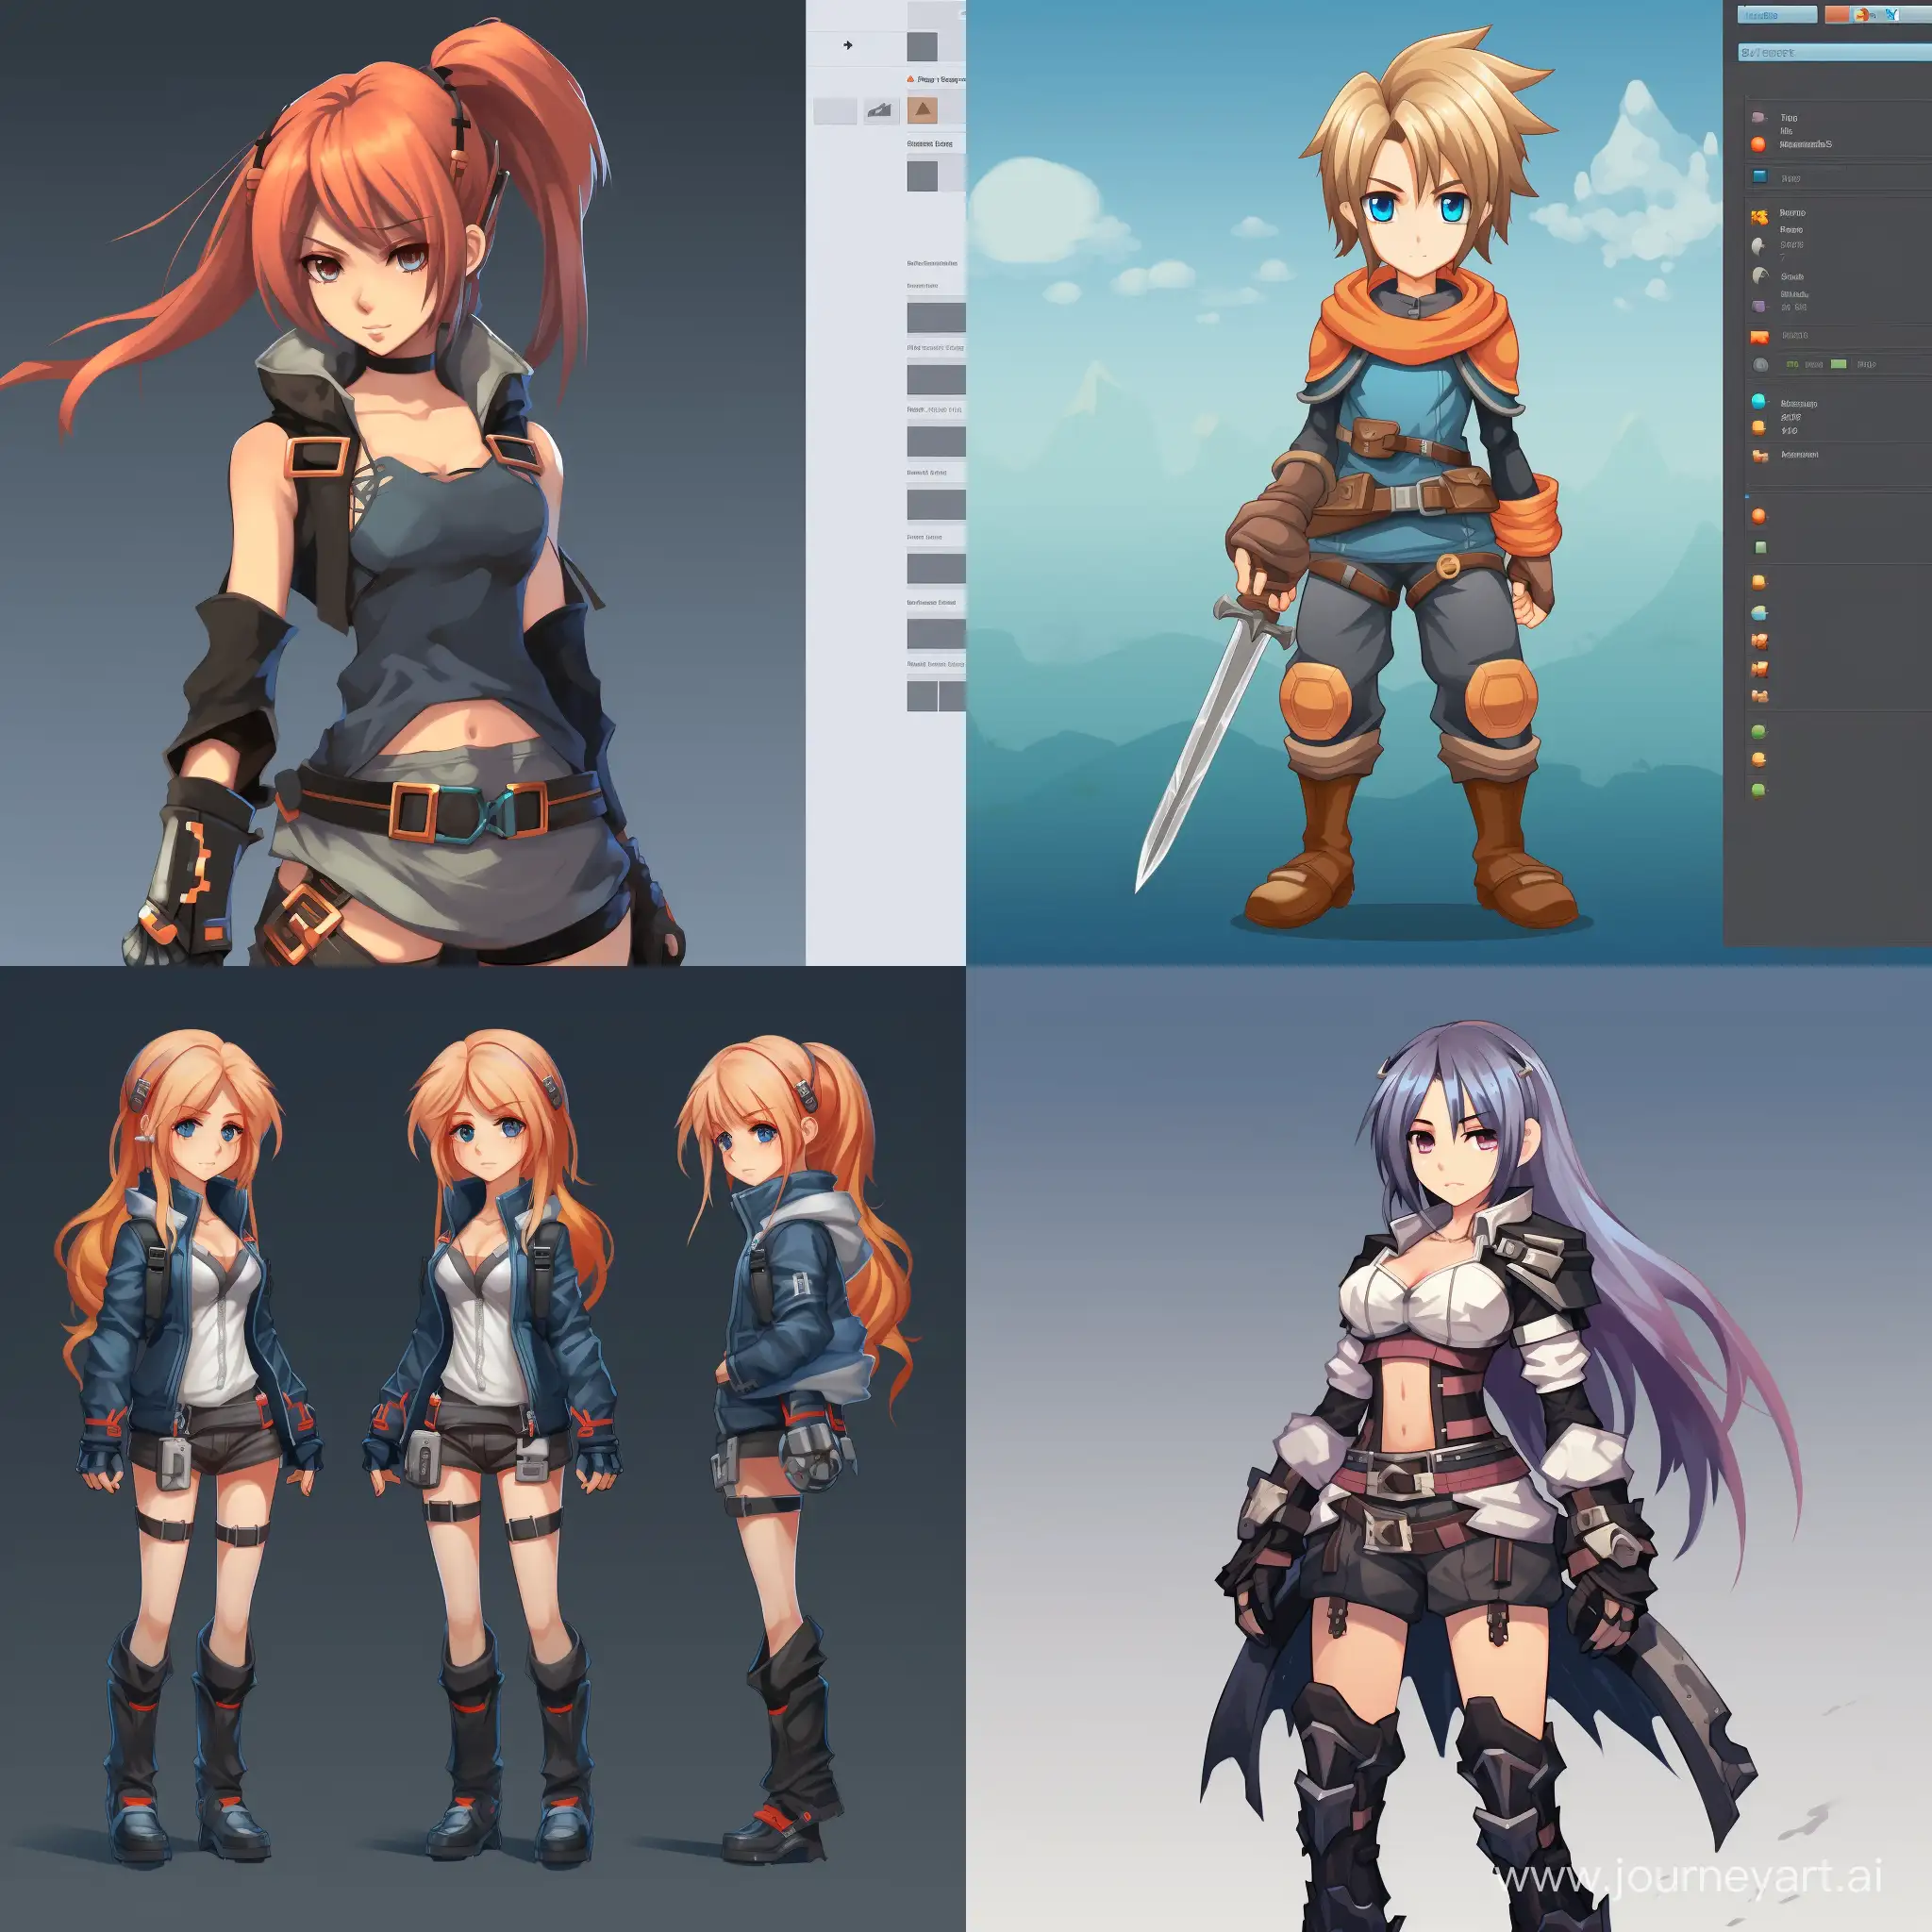 AnimeStyle-Pixel-Art-Game-Character-Sprite-with-AR-Aspect-Ratio-11